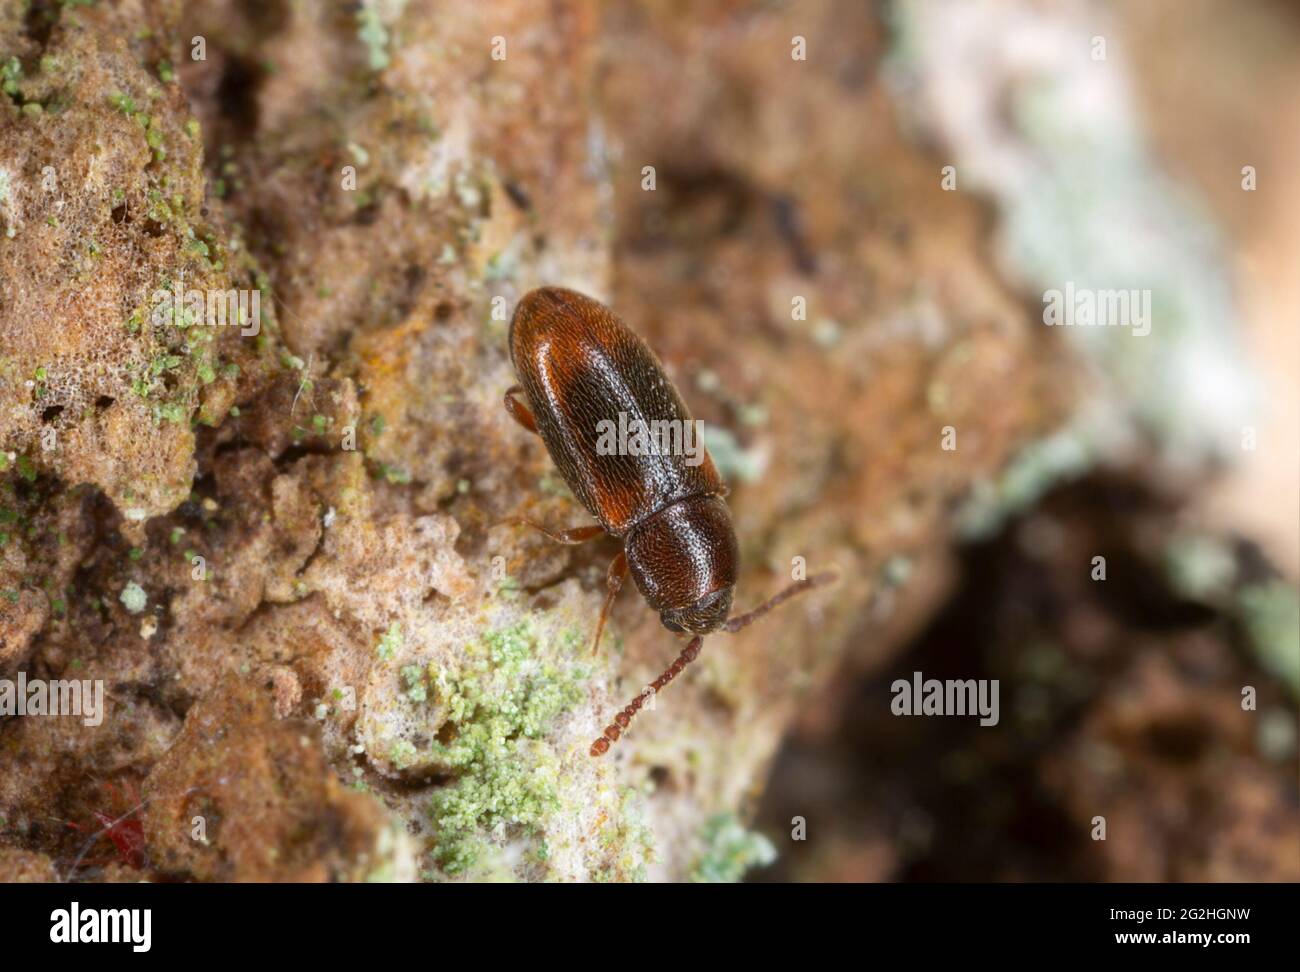 Silken fungus beetle, Atomaria affinis on aspen wood photographed with high magnification Stock Photo